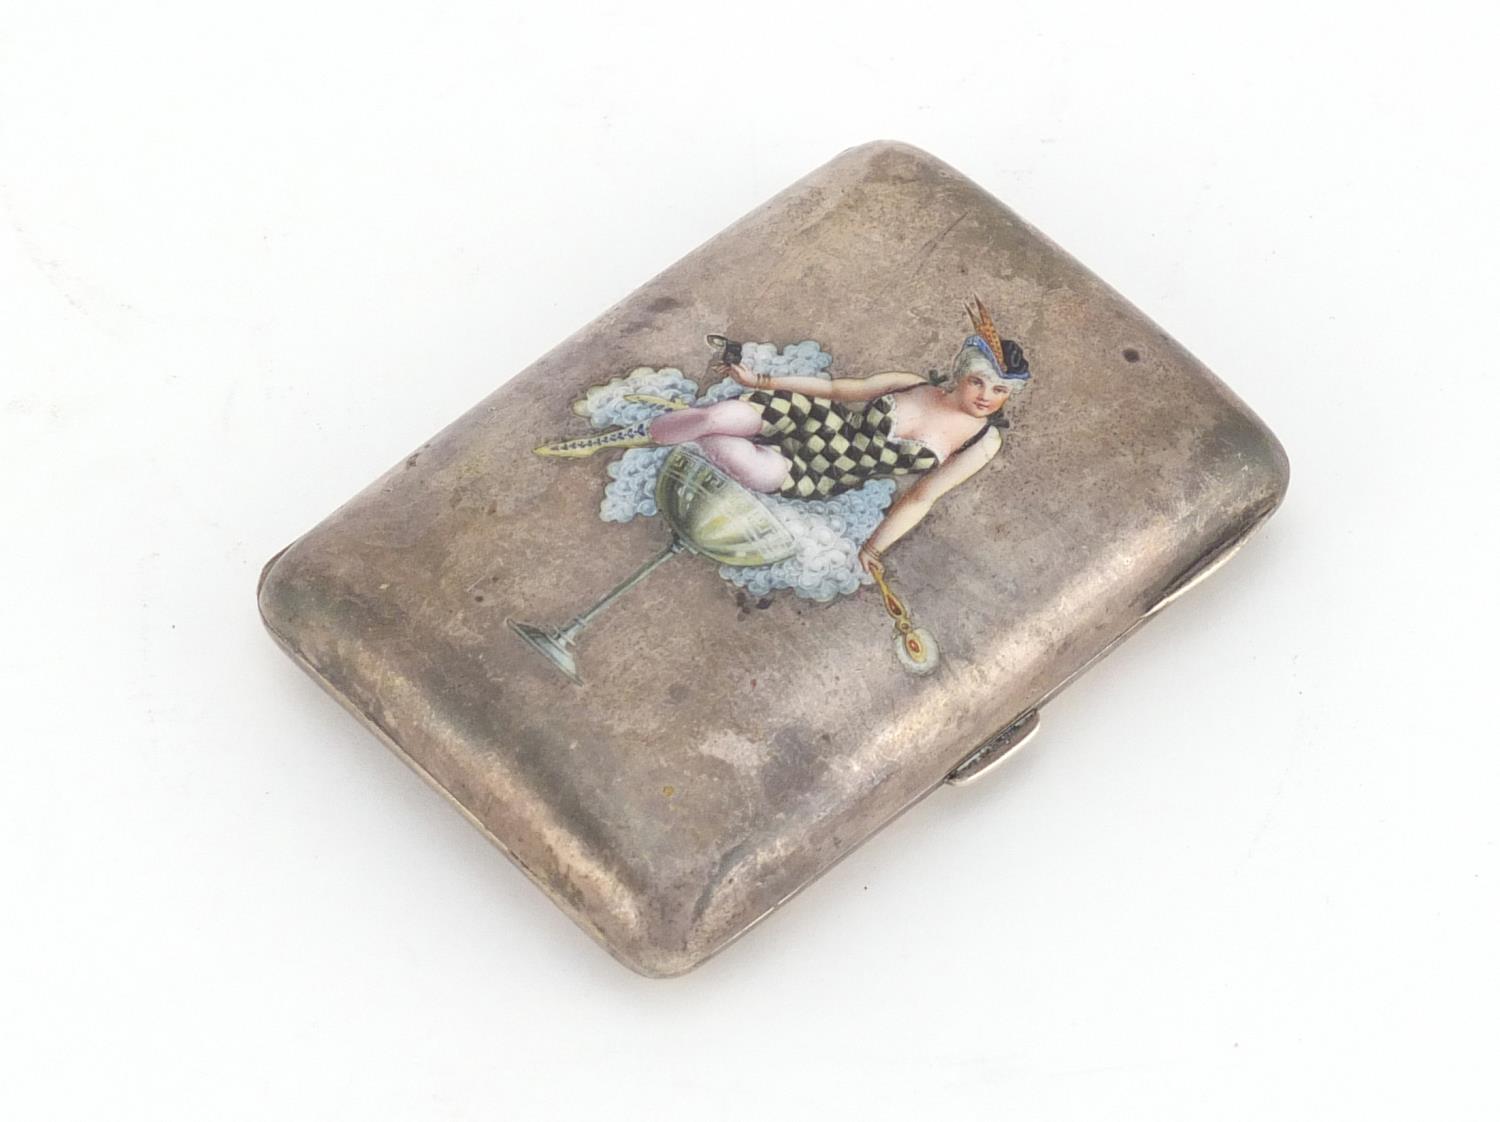 Austo-Hungarian 900 grade silver and enamel cigarette case by Georg A Scheid, enameled with a pin up